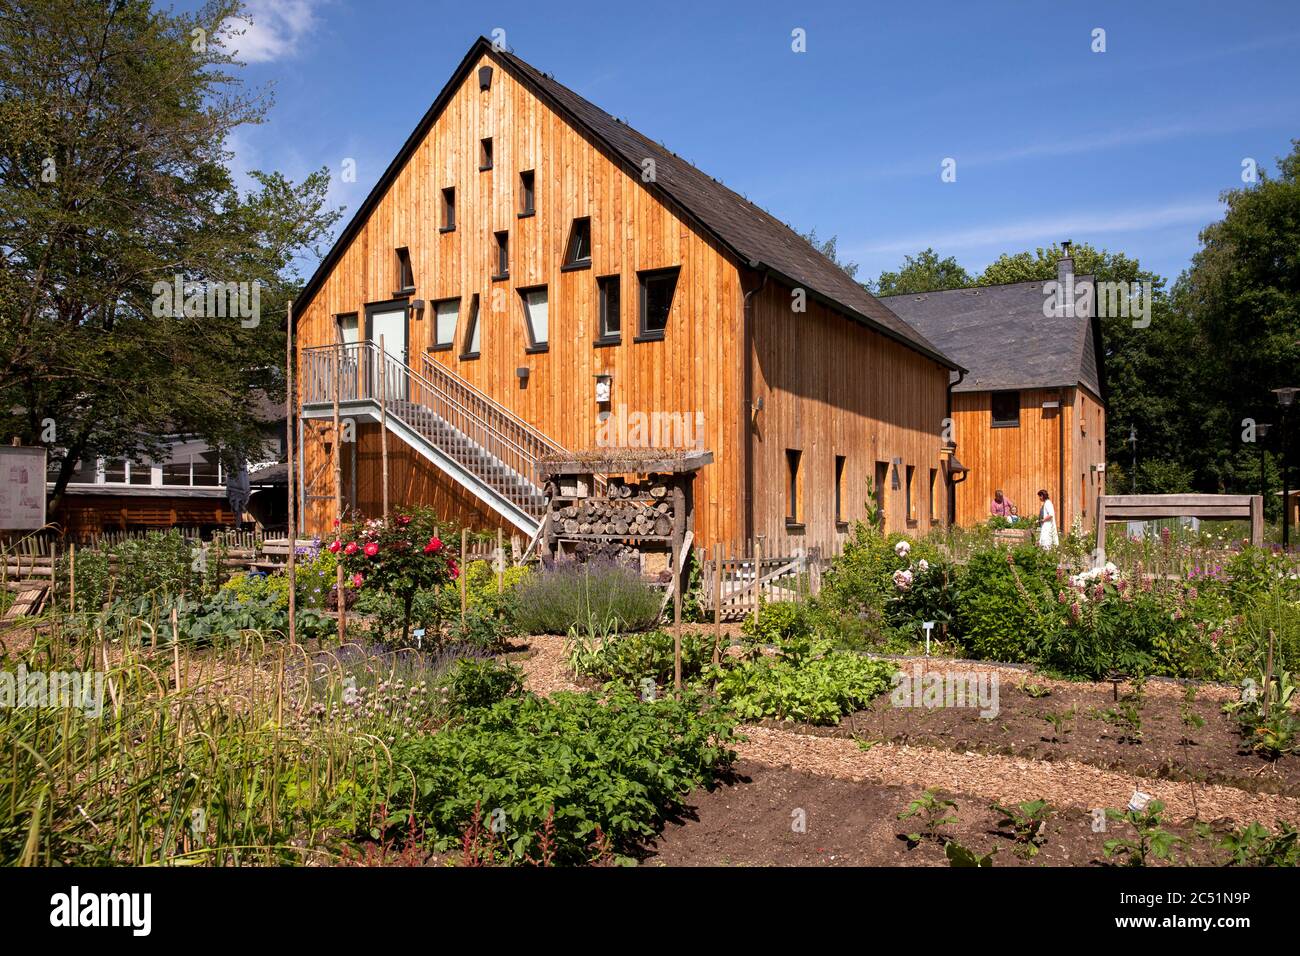 Haus der Natur (house of nature) in the Kottenforst, museum and environmental education centre of the city of Bonn, North Rhine-Westphalia, Germany. Stock Photo